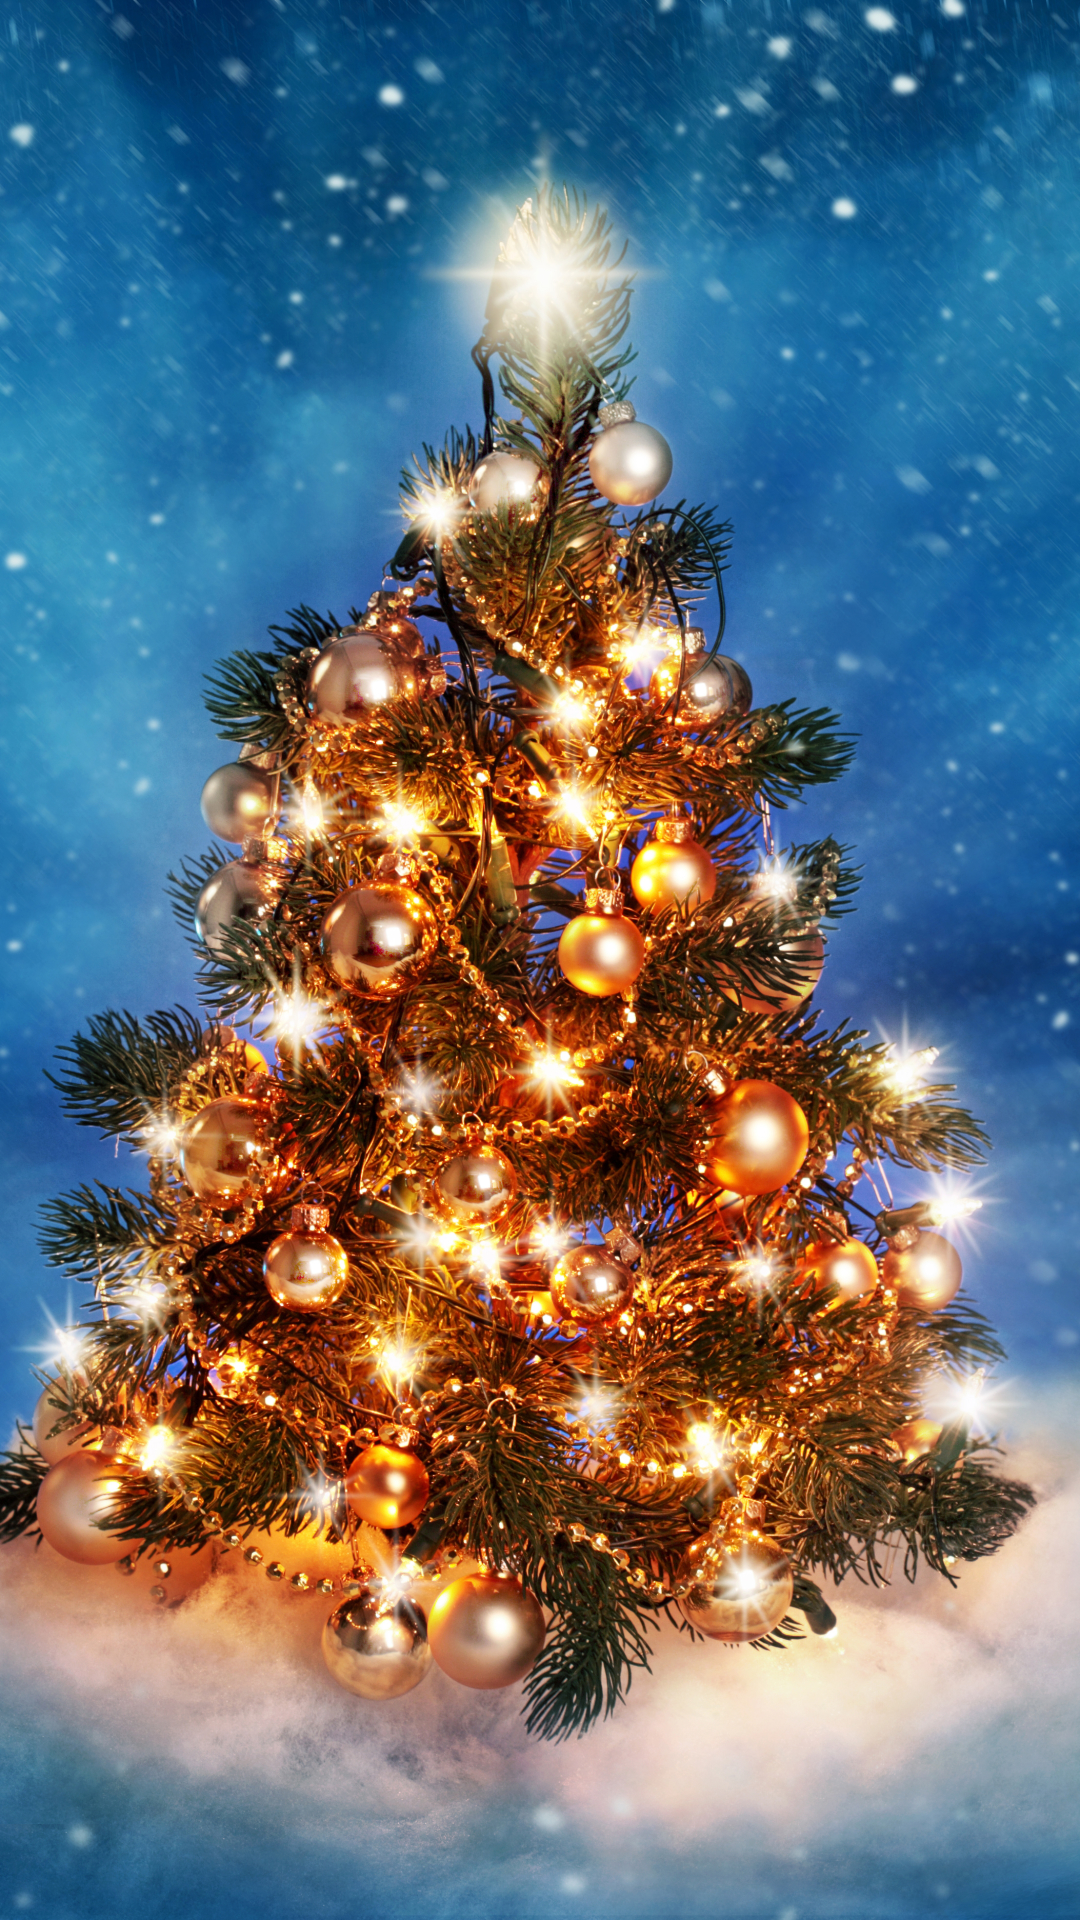 Christmas Wallpapers Hd For Smartphone - HD Wallpaper 